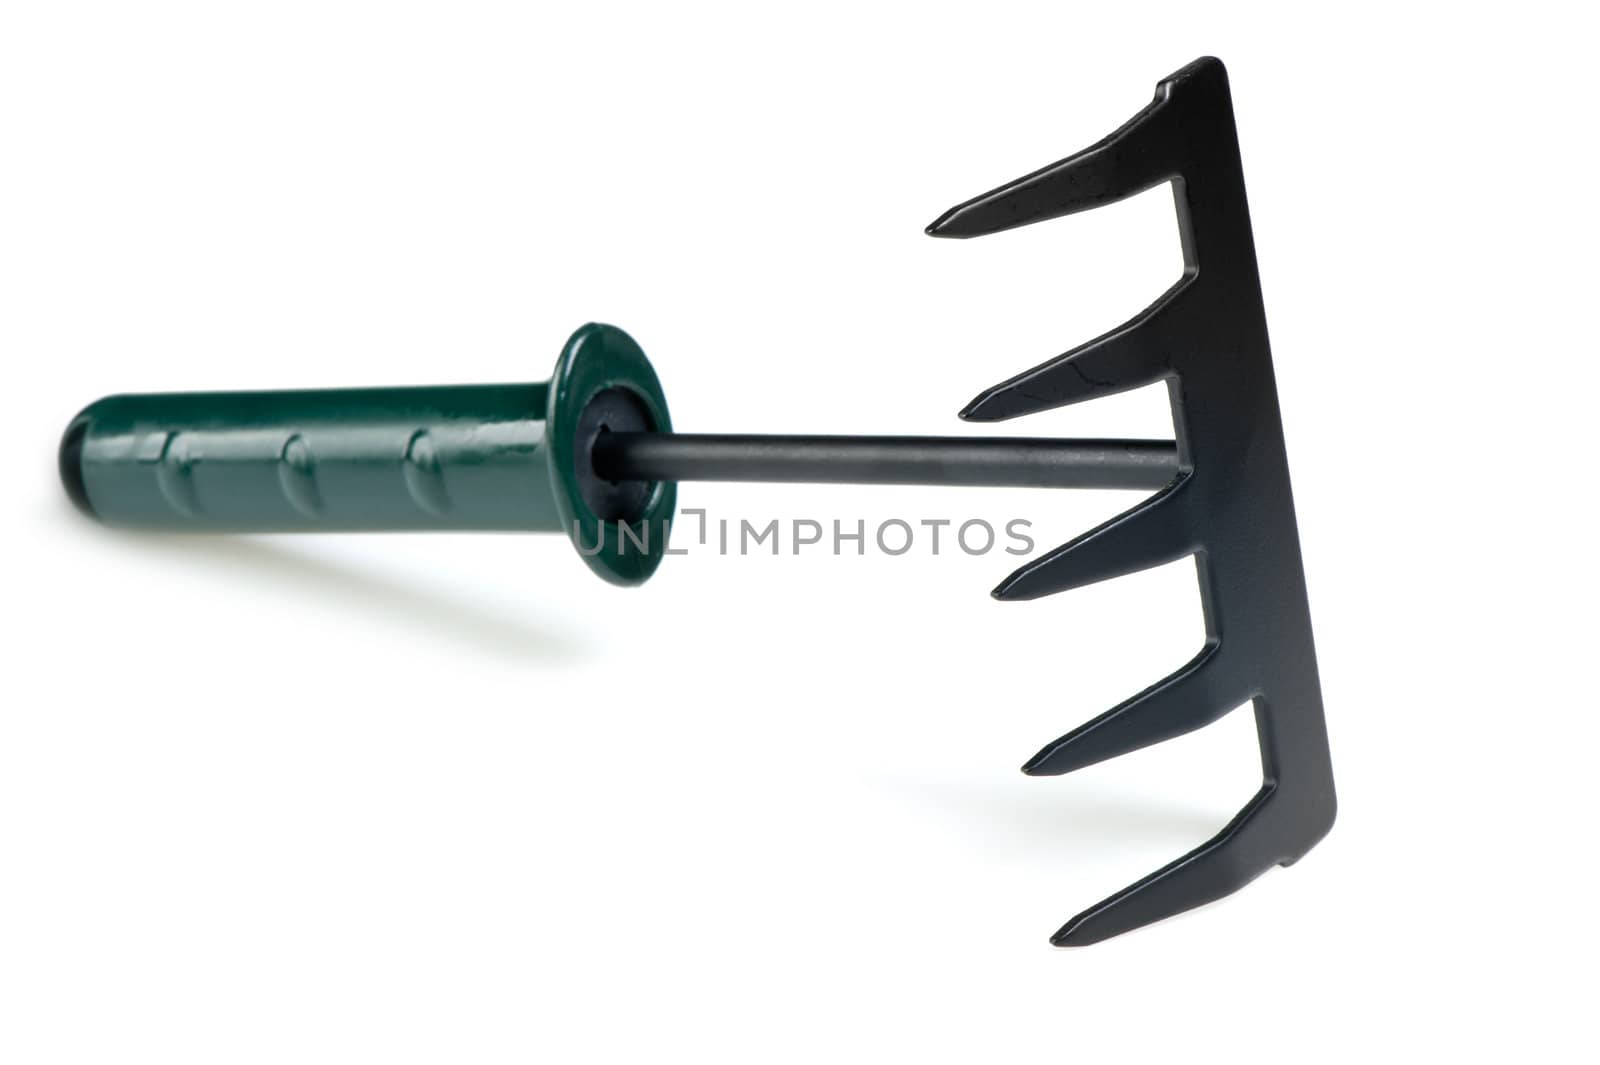 The garden tool a rake. Isolated on a white background